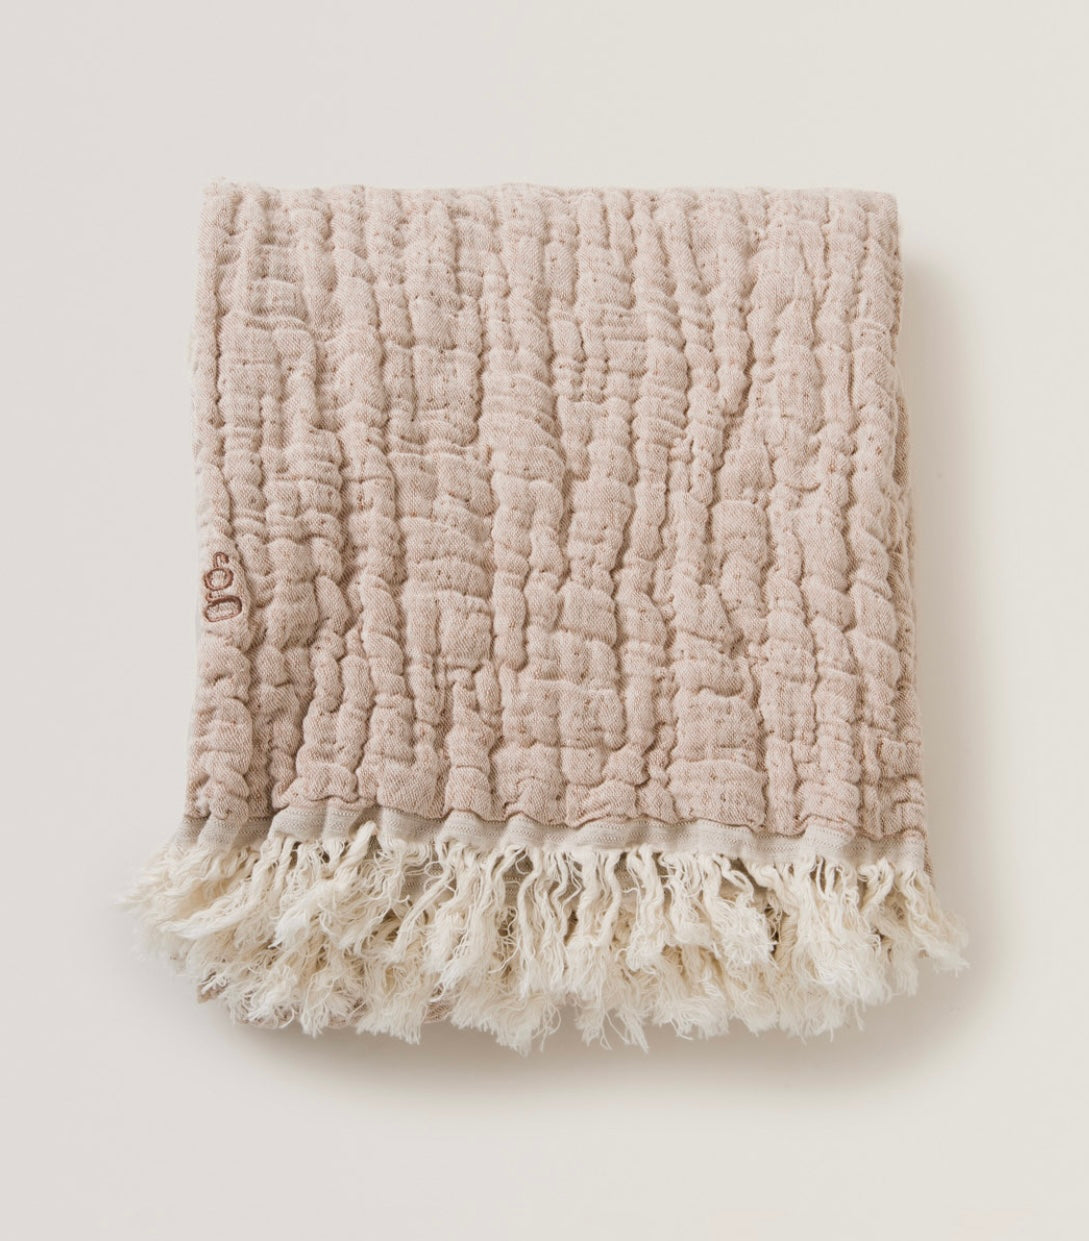 Garbo & Friends Mellow Blanket Small- Tawny